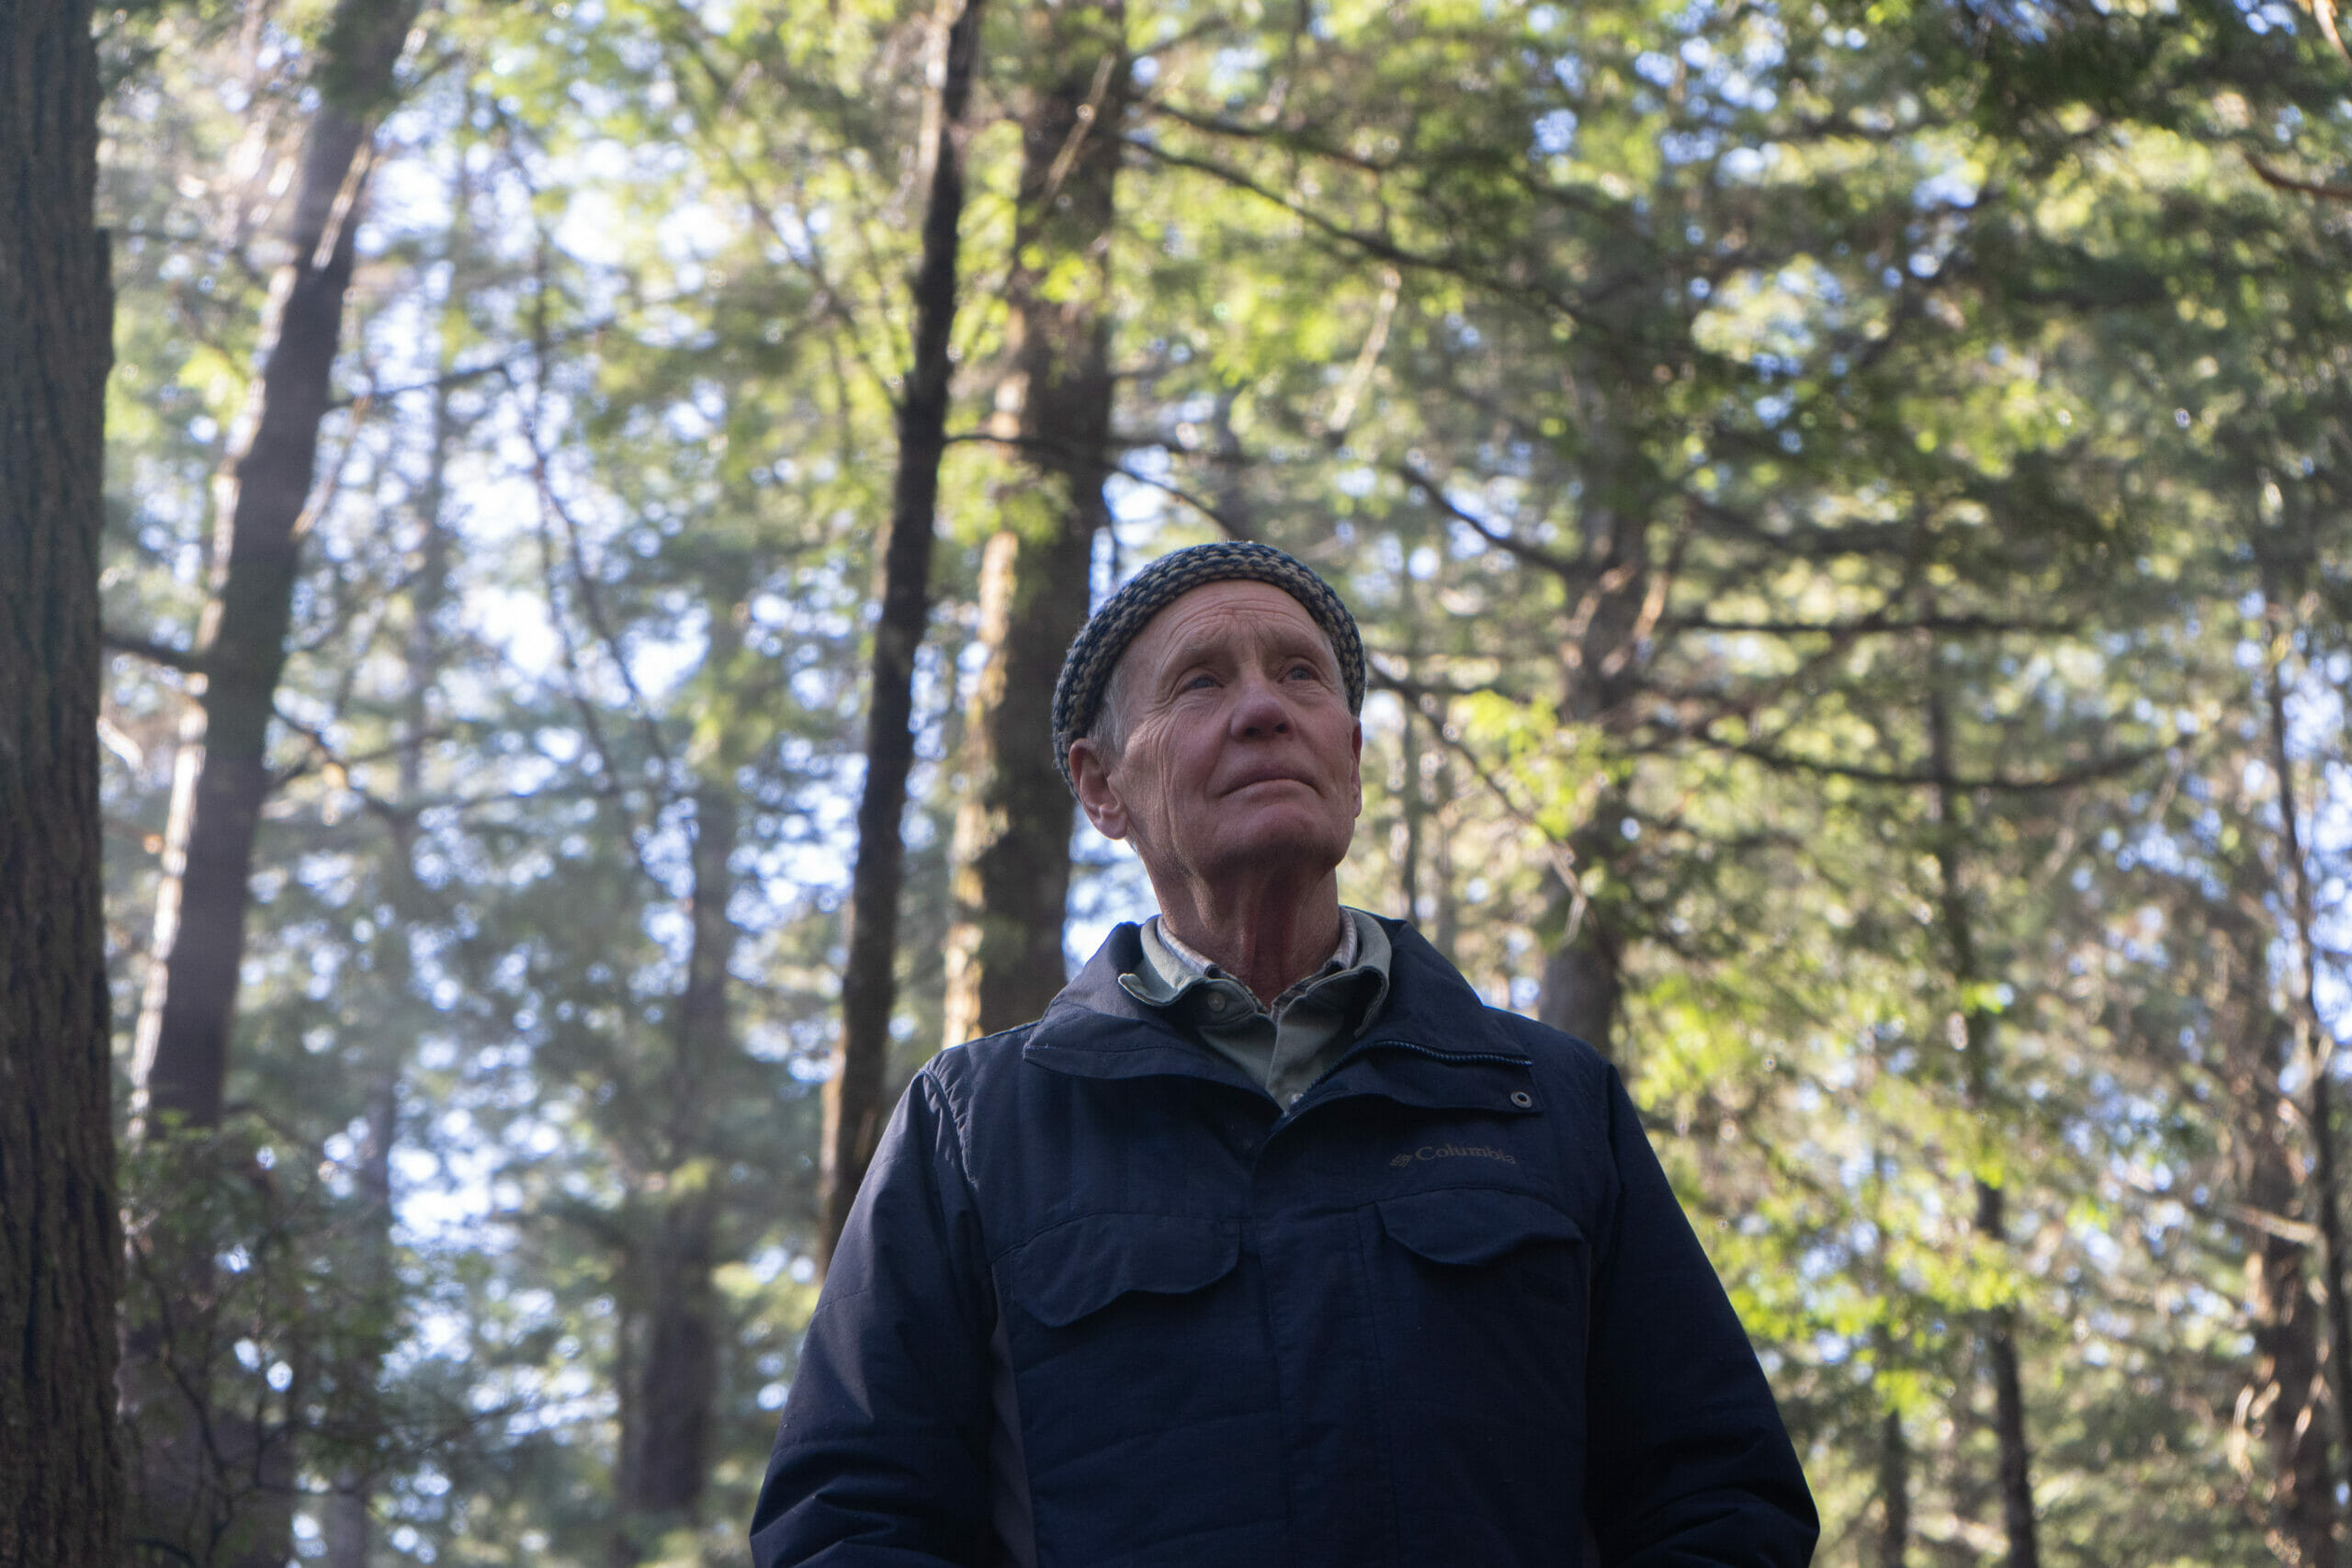 An older man wearing a woolen hat and blue jacket stands in with his hands in his pockets, looking past the camera into the distance. Behind him, sunlight filters through a green forest canopy.